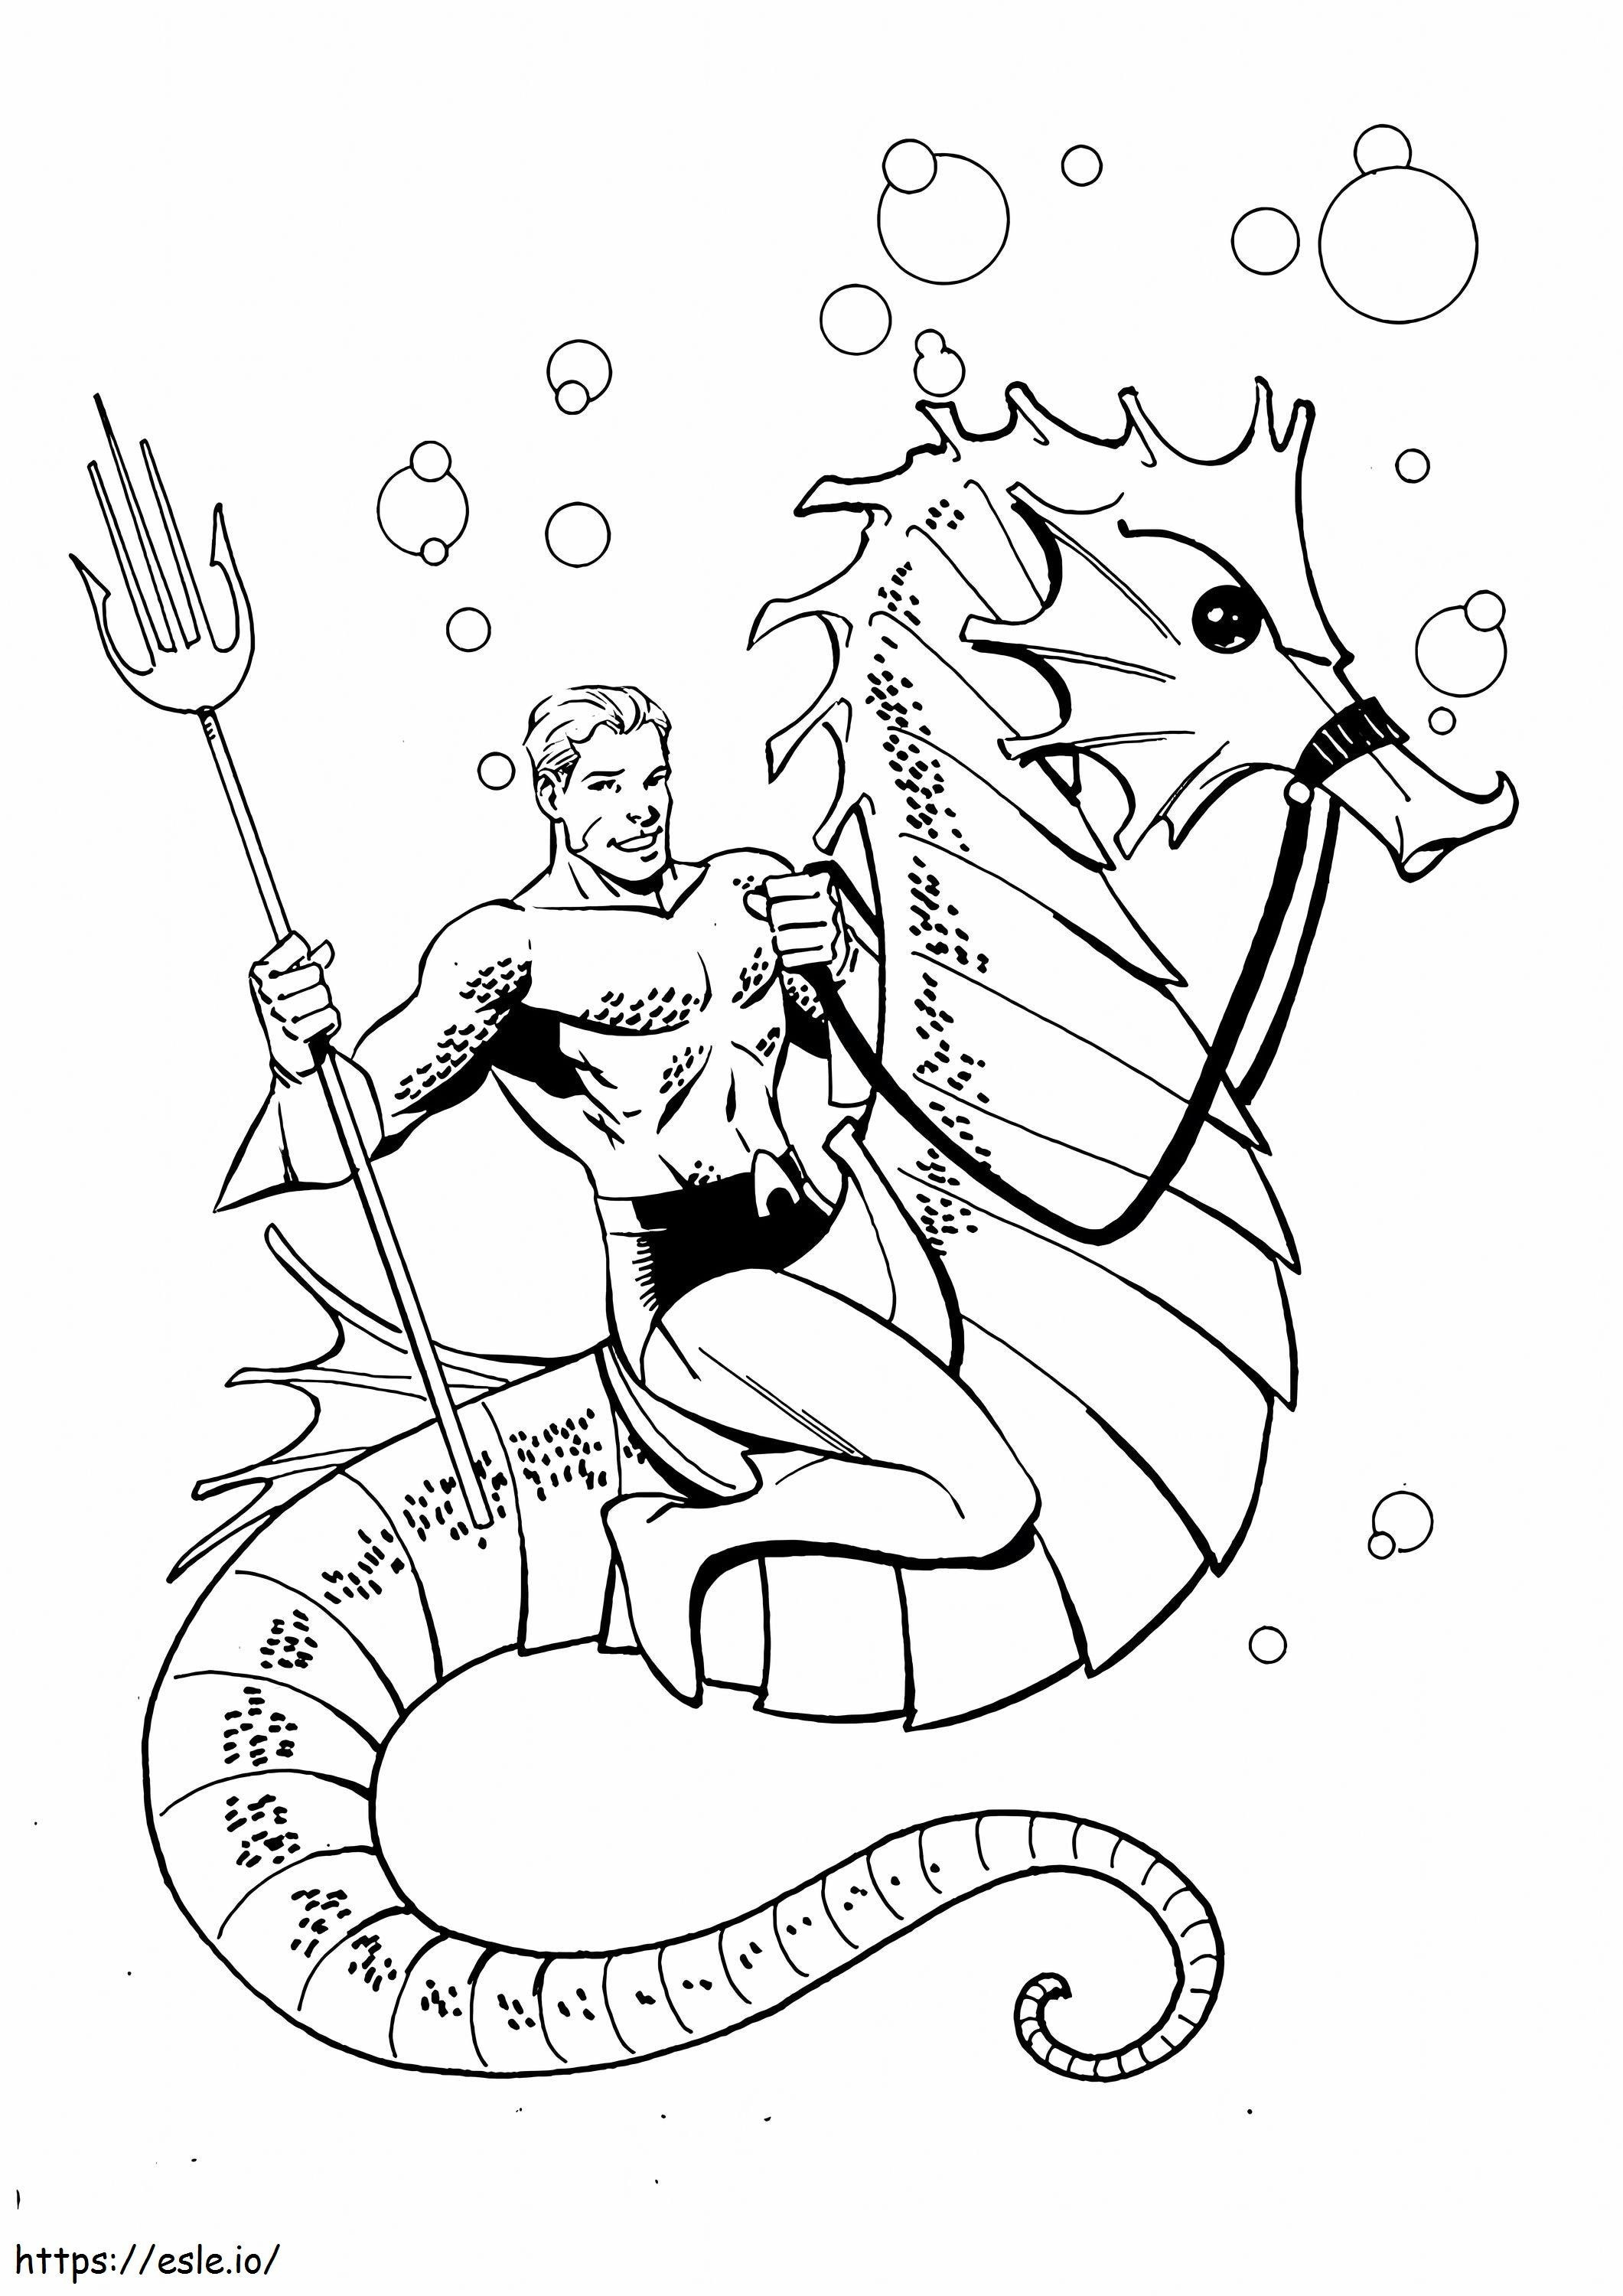 Aquaman Riding Scaled Seahorse coloring page